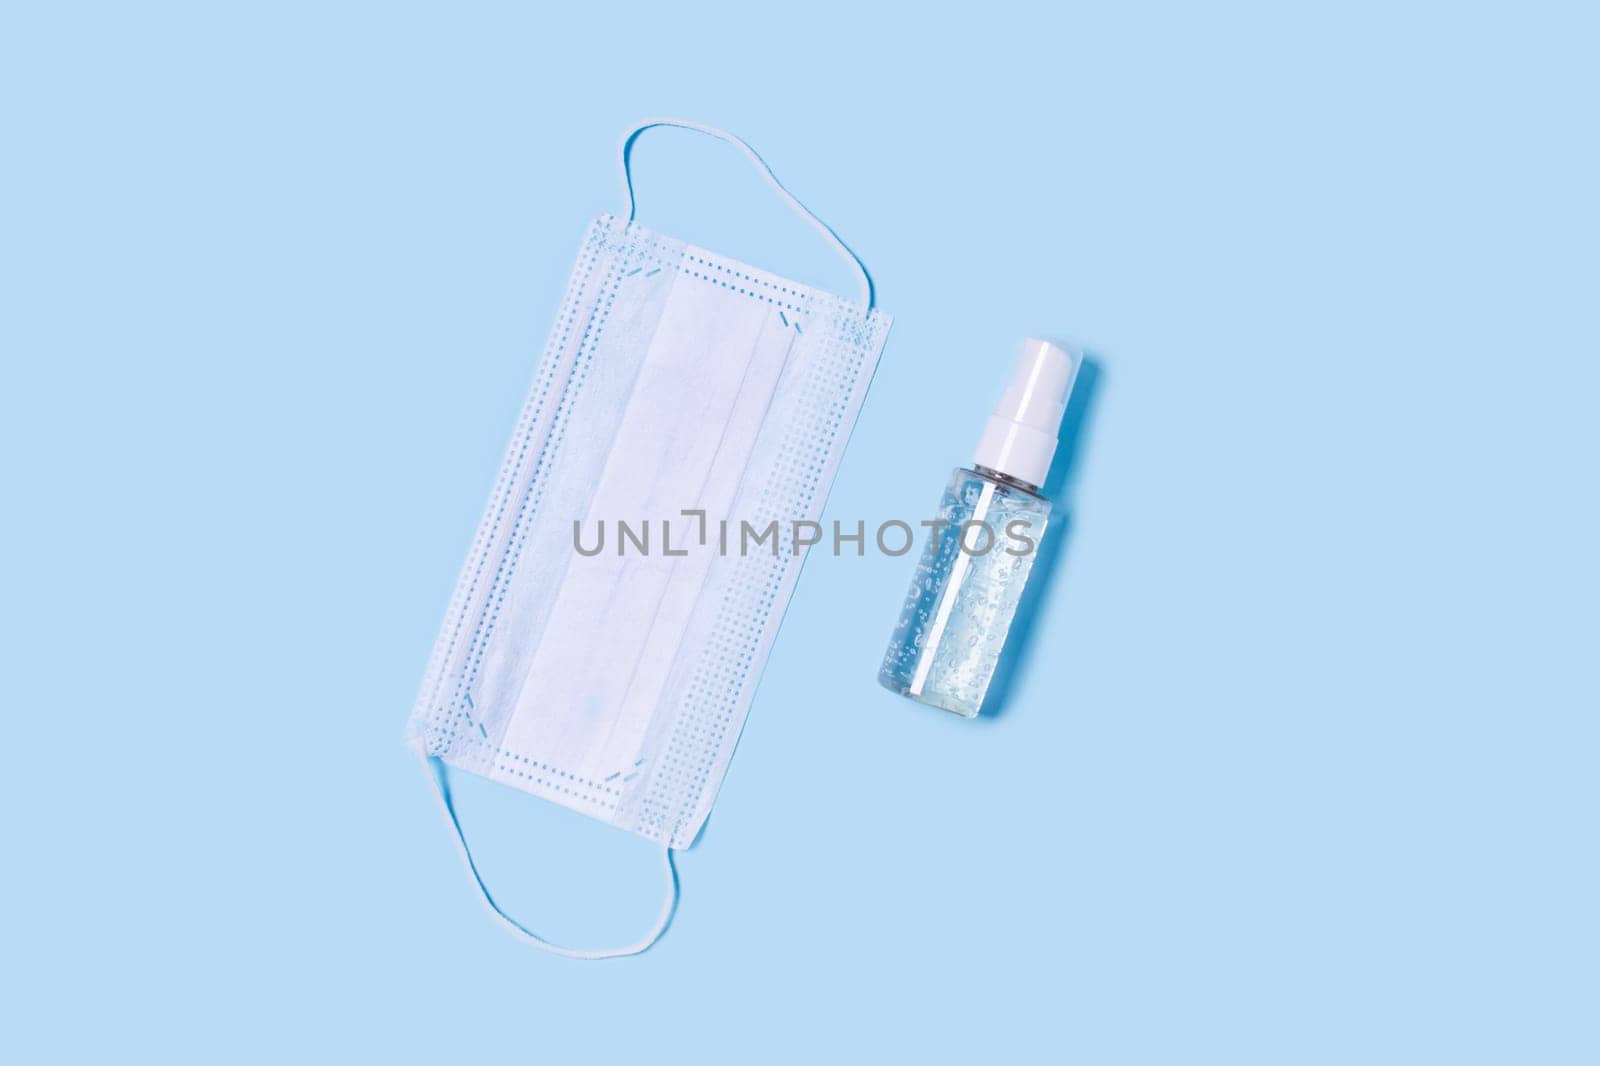 Flat lay with a medical mask placed in the center, a bottle of antiseptic soap or hand sanitizer.